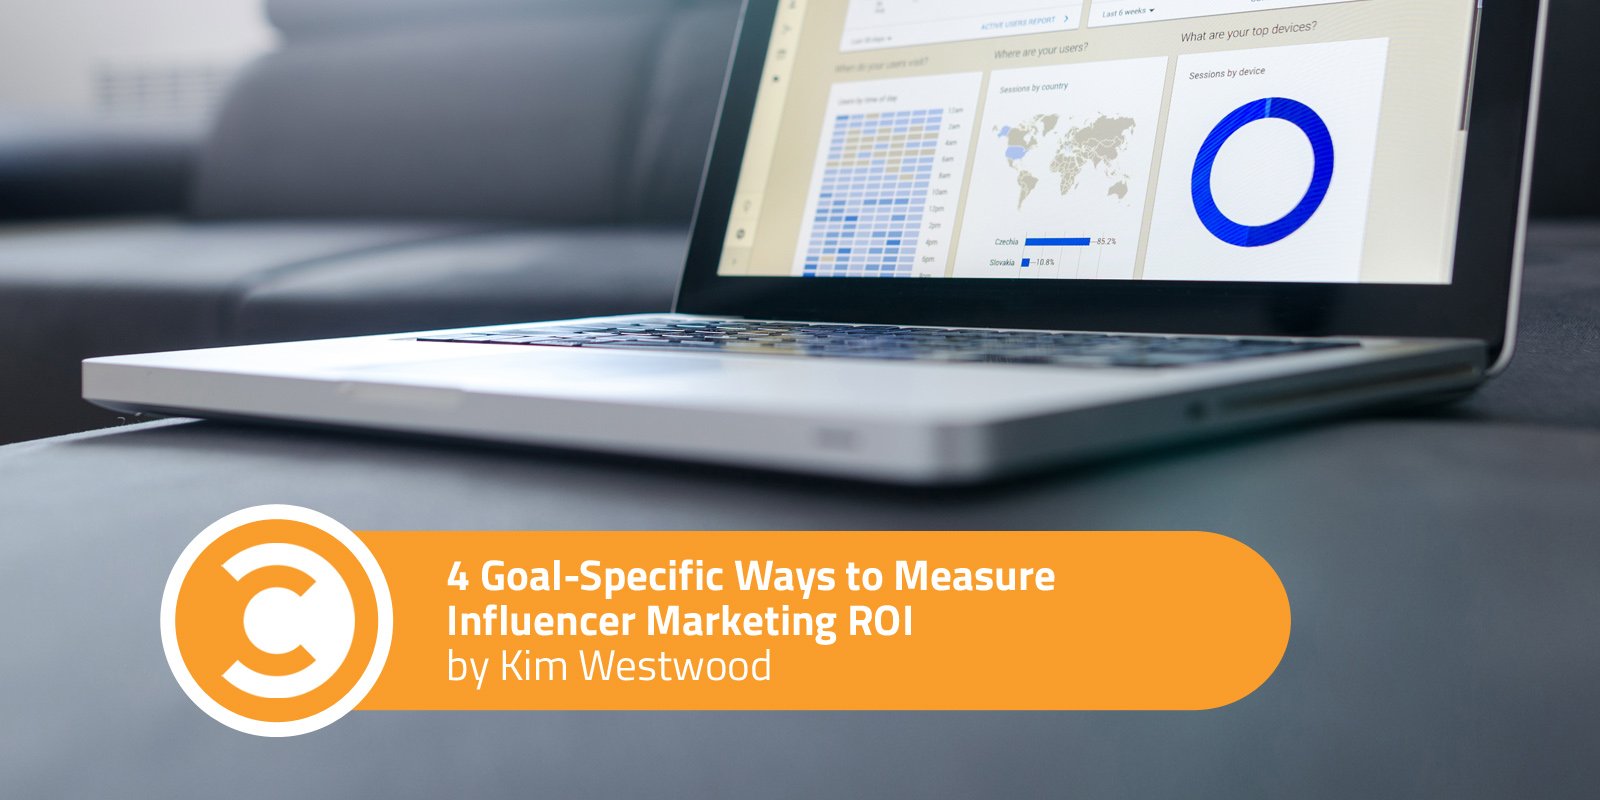 4 Goal-Specific Ways to Measure Influencer Marketing ROI